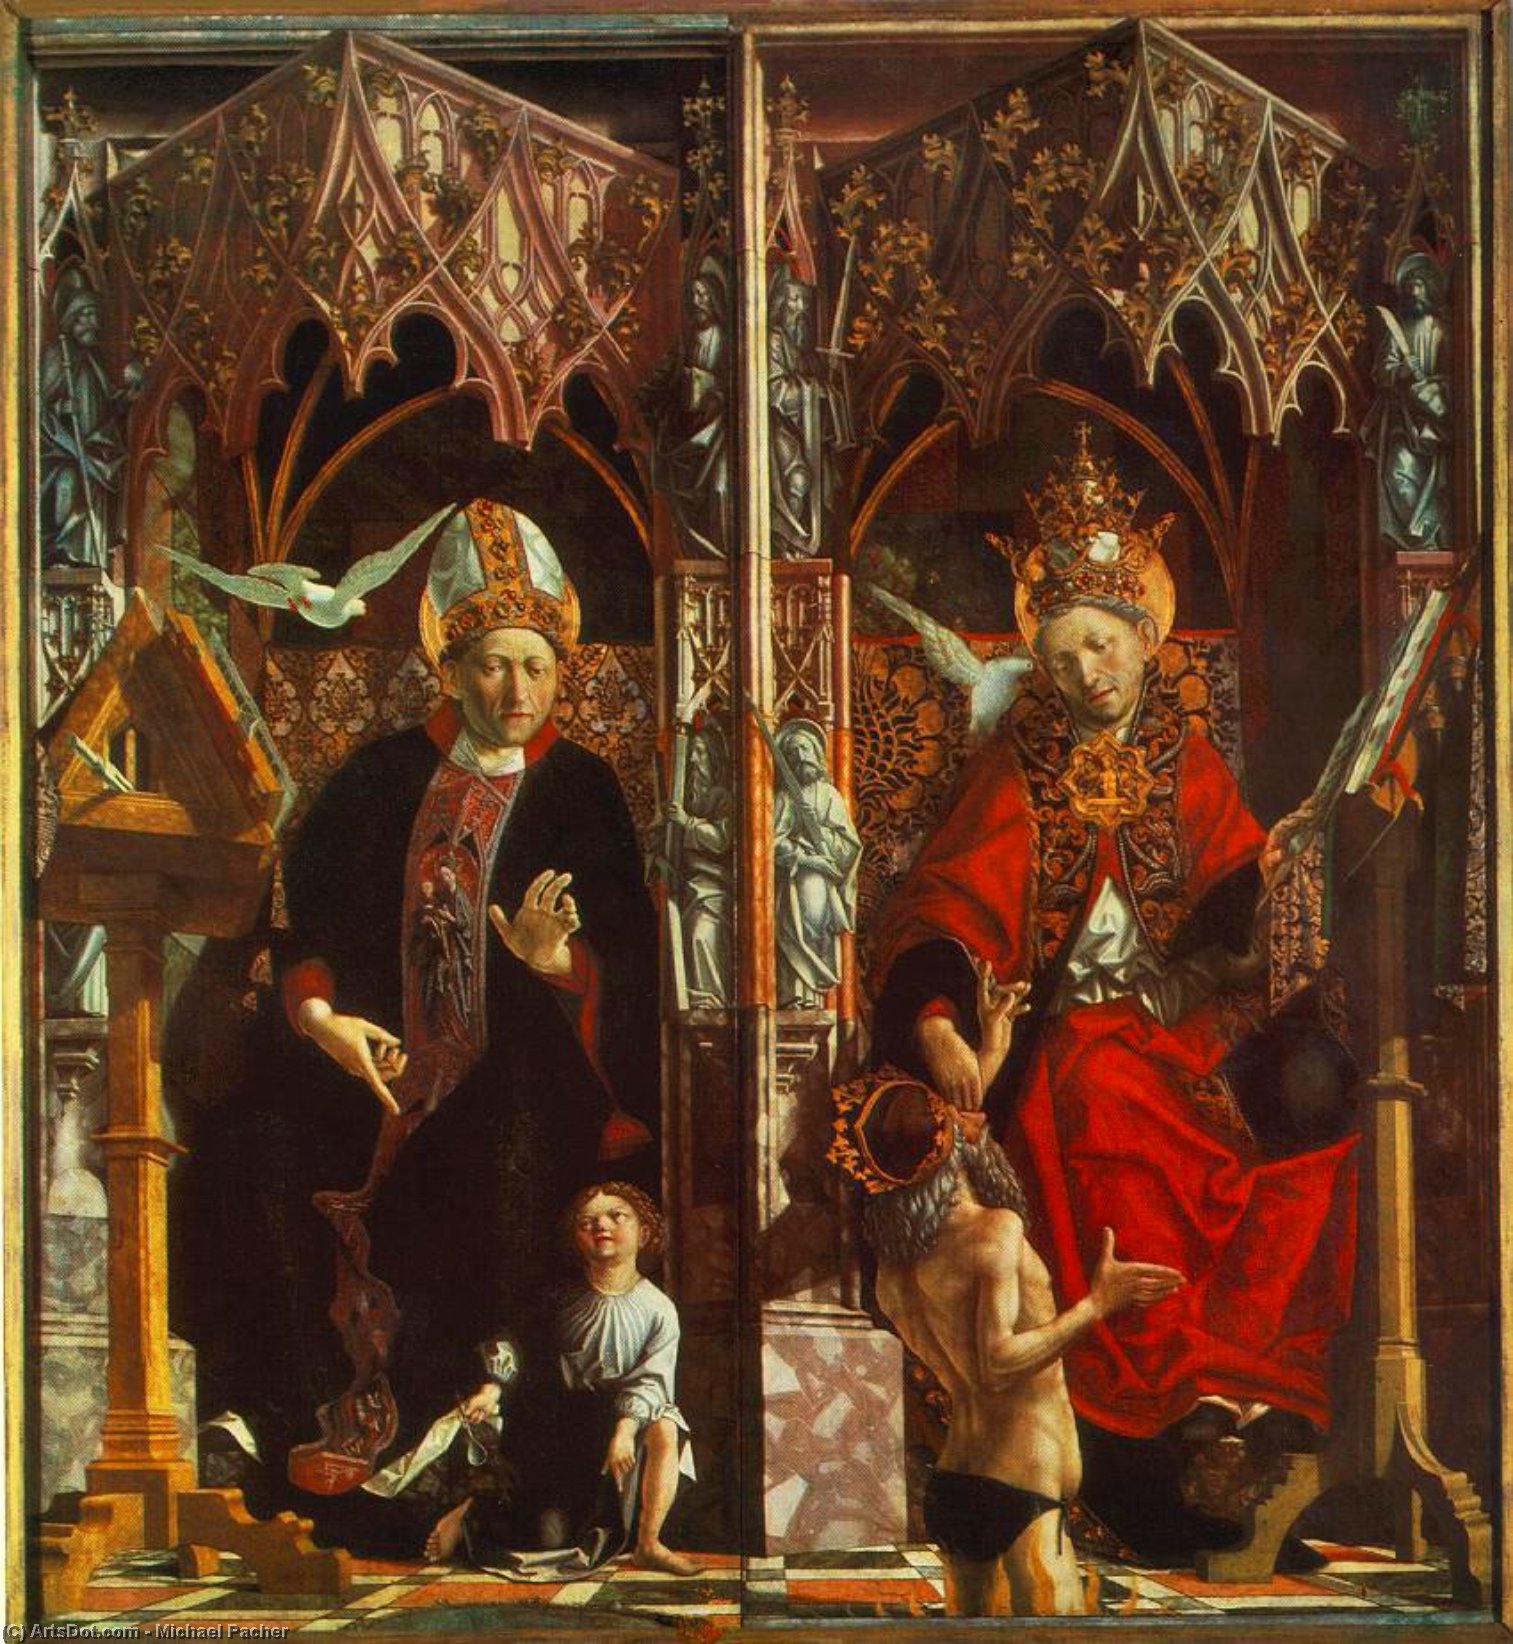 WikiOO.org - دایره المعارف هنرهای زیبا - نقاشی، آثار هنری Michael Pacher - Altarpiece of the Church Fathers: St Augustine and St Gregory